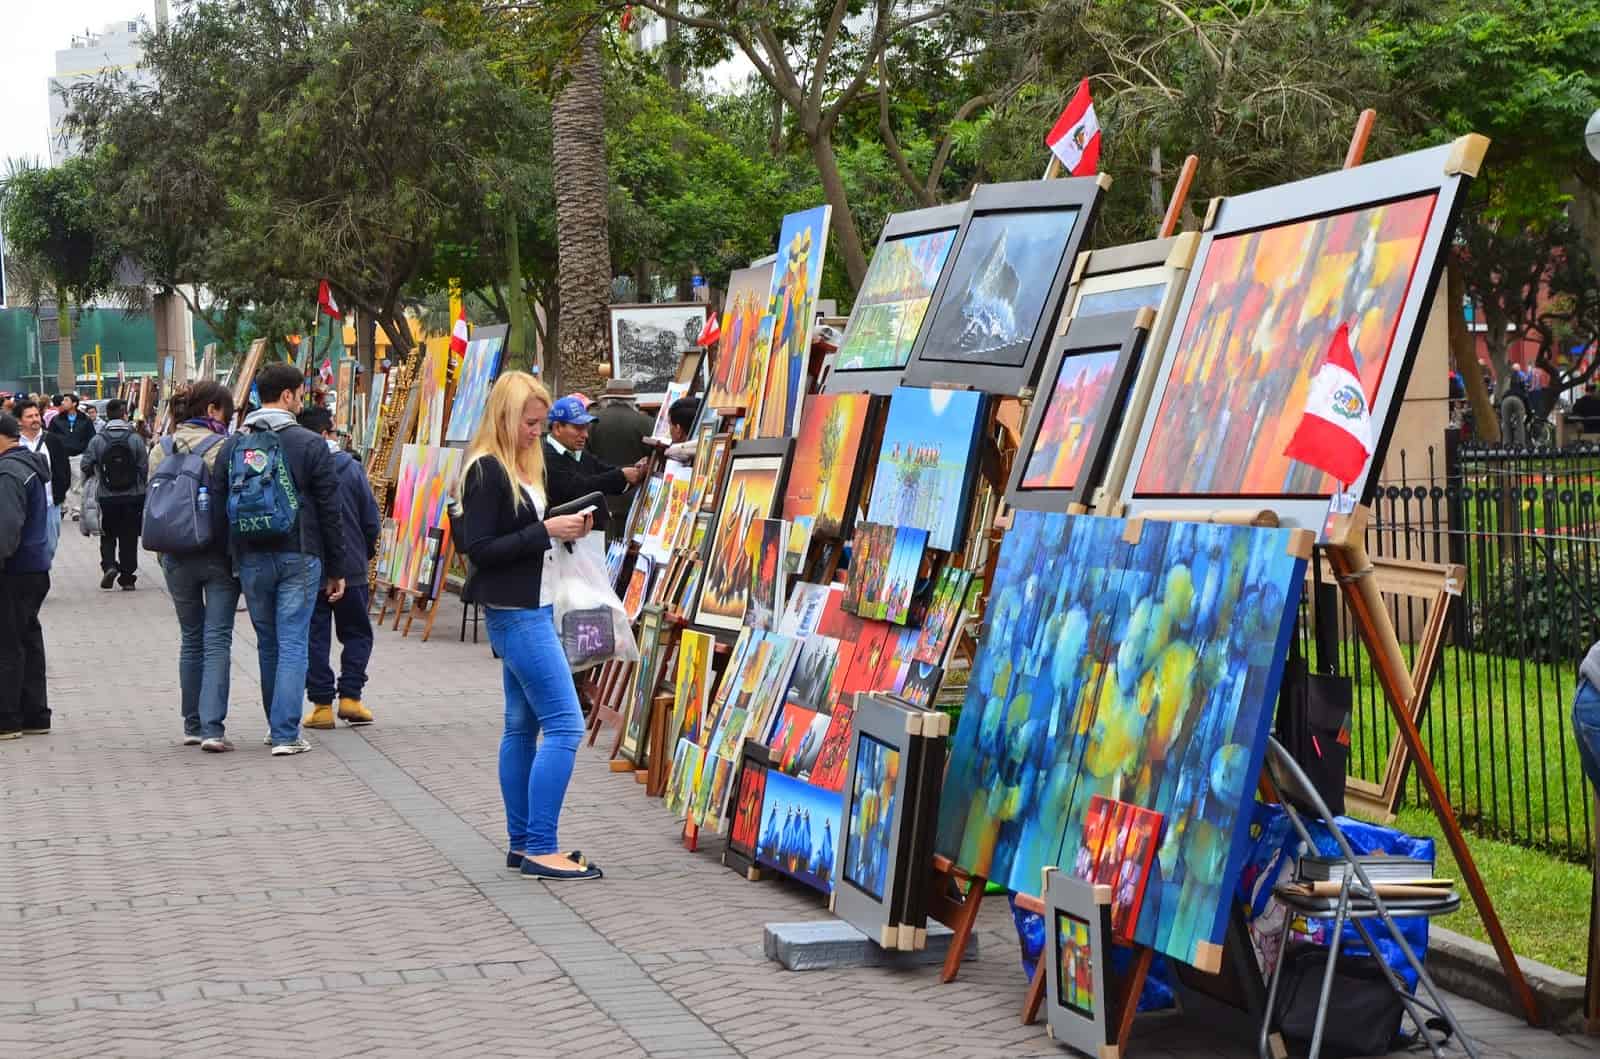 Artists outside of Parque Central in Miraflores, Lima, Peru